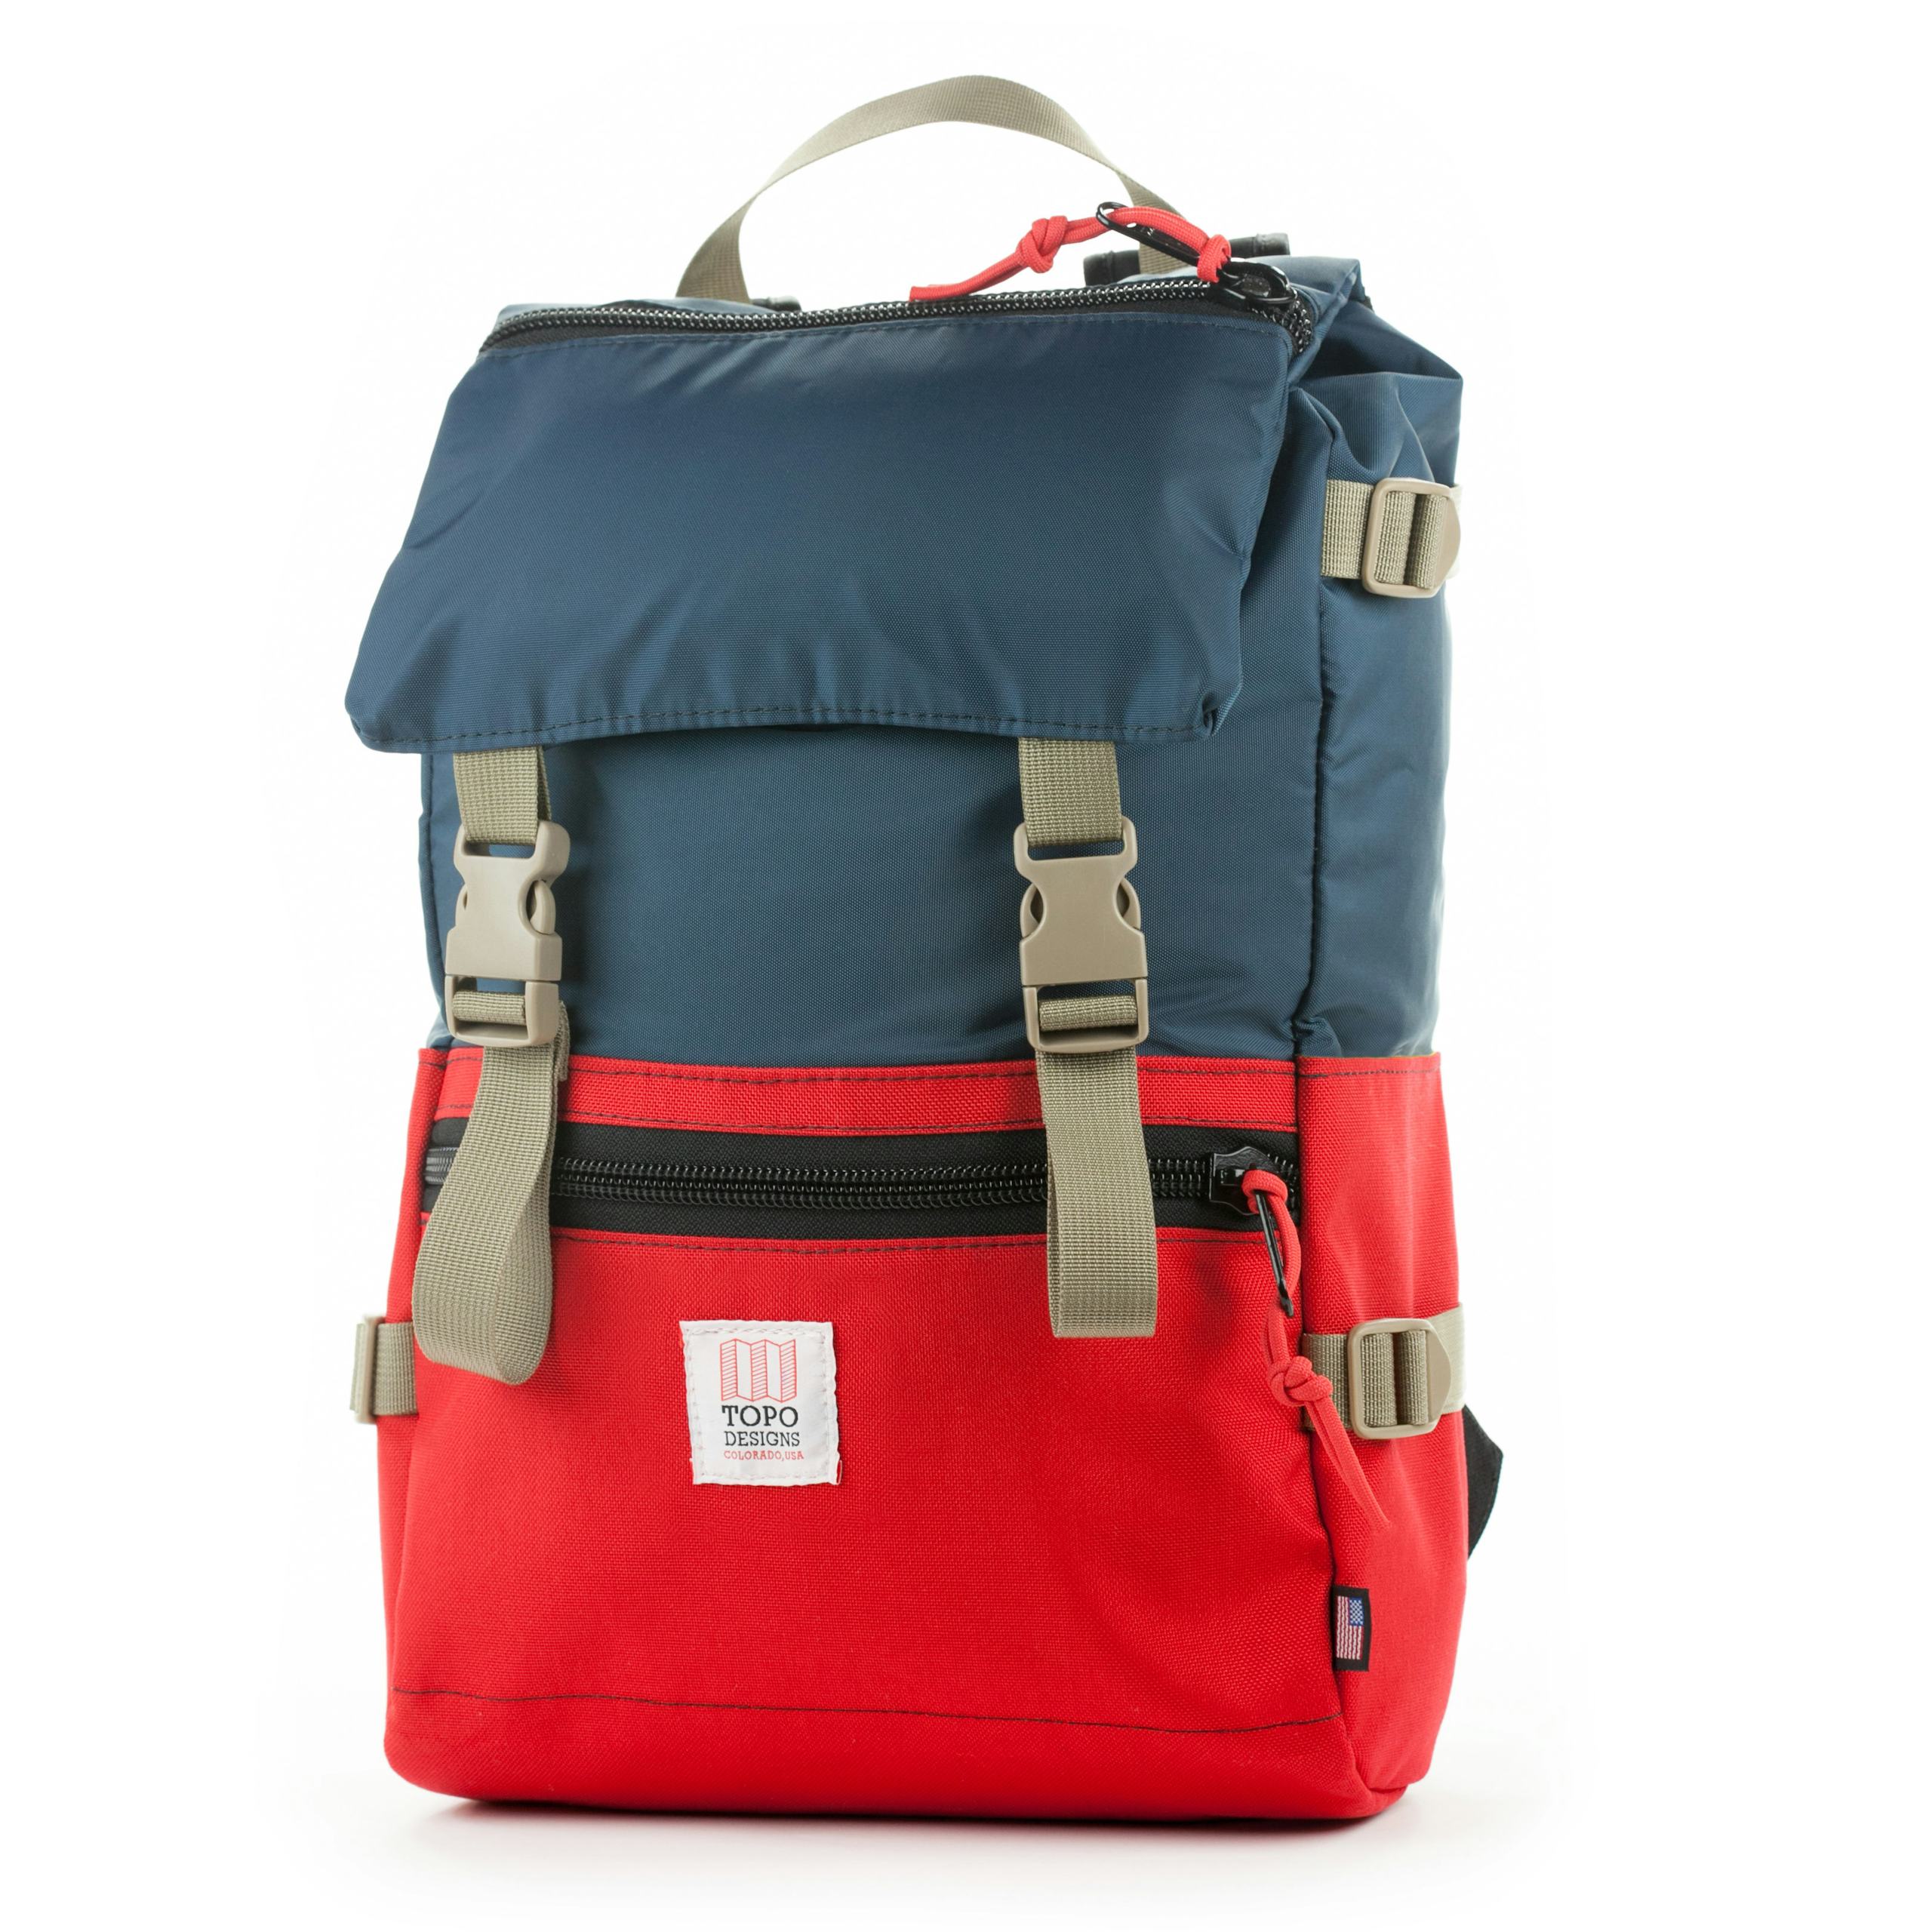 Topo Designs Rover Pack - Navy/Red | Backpacks | Huckberry